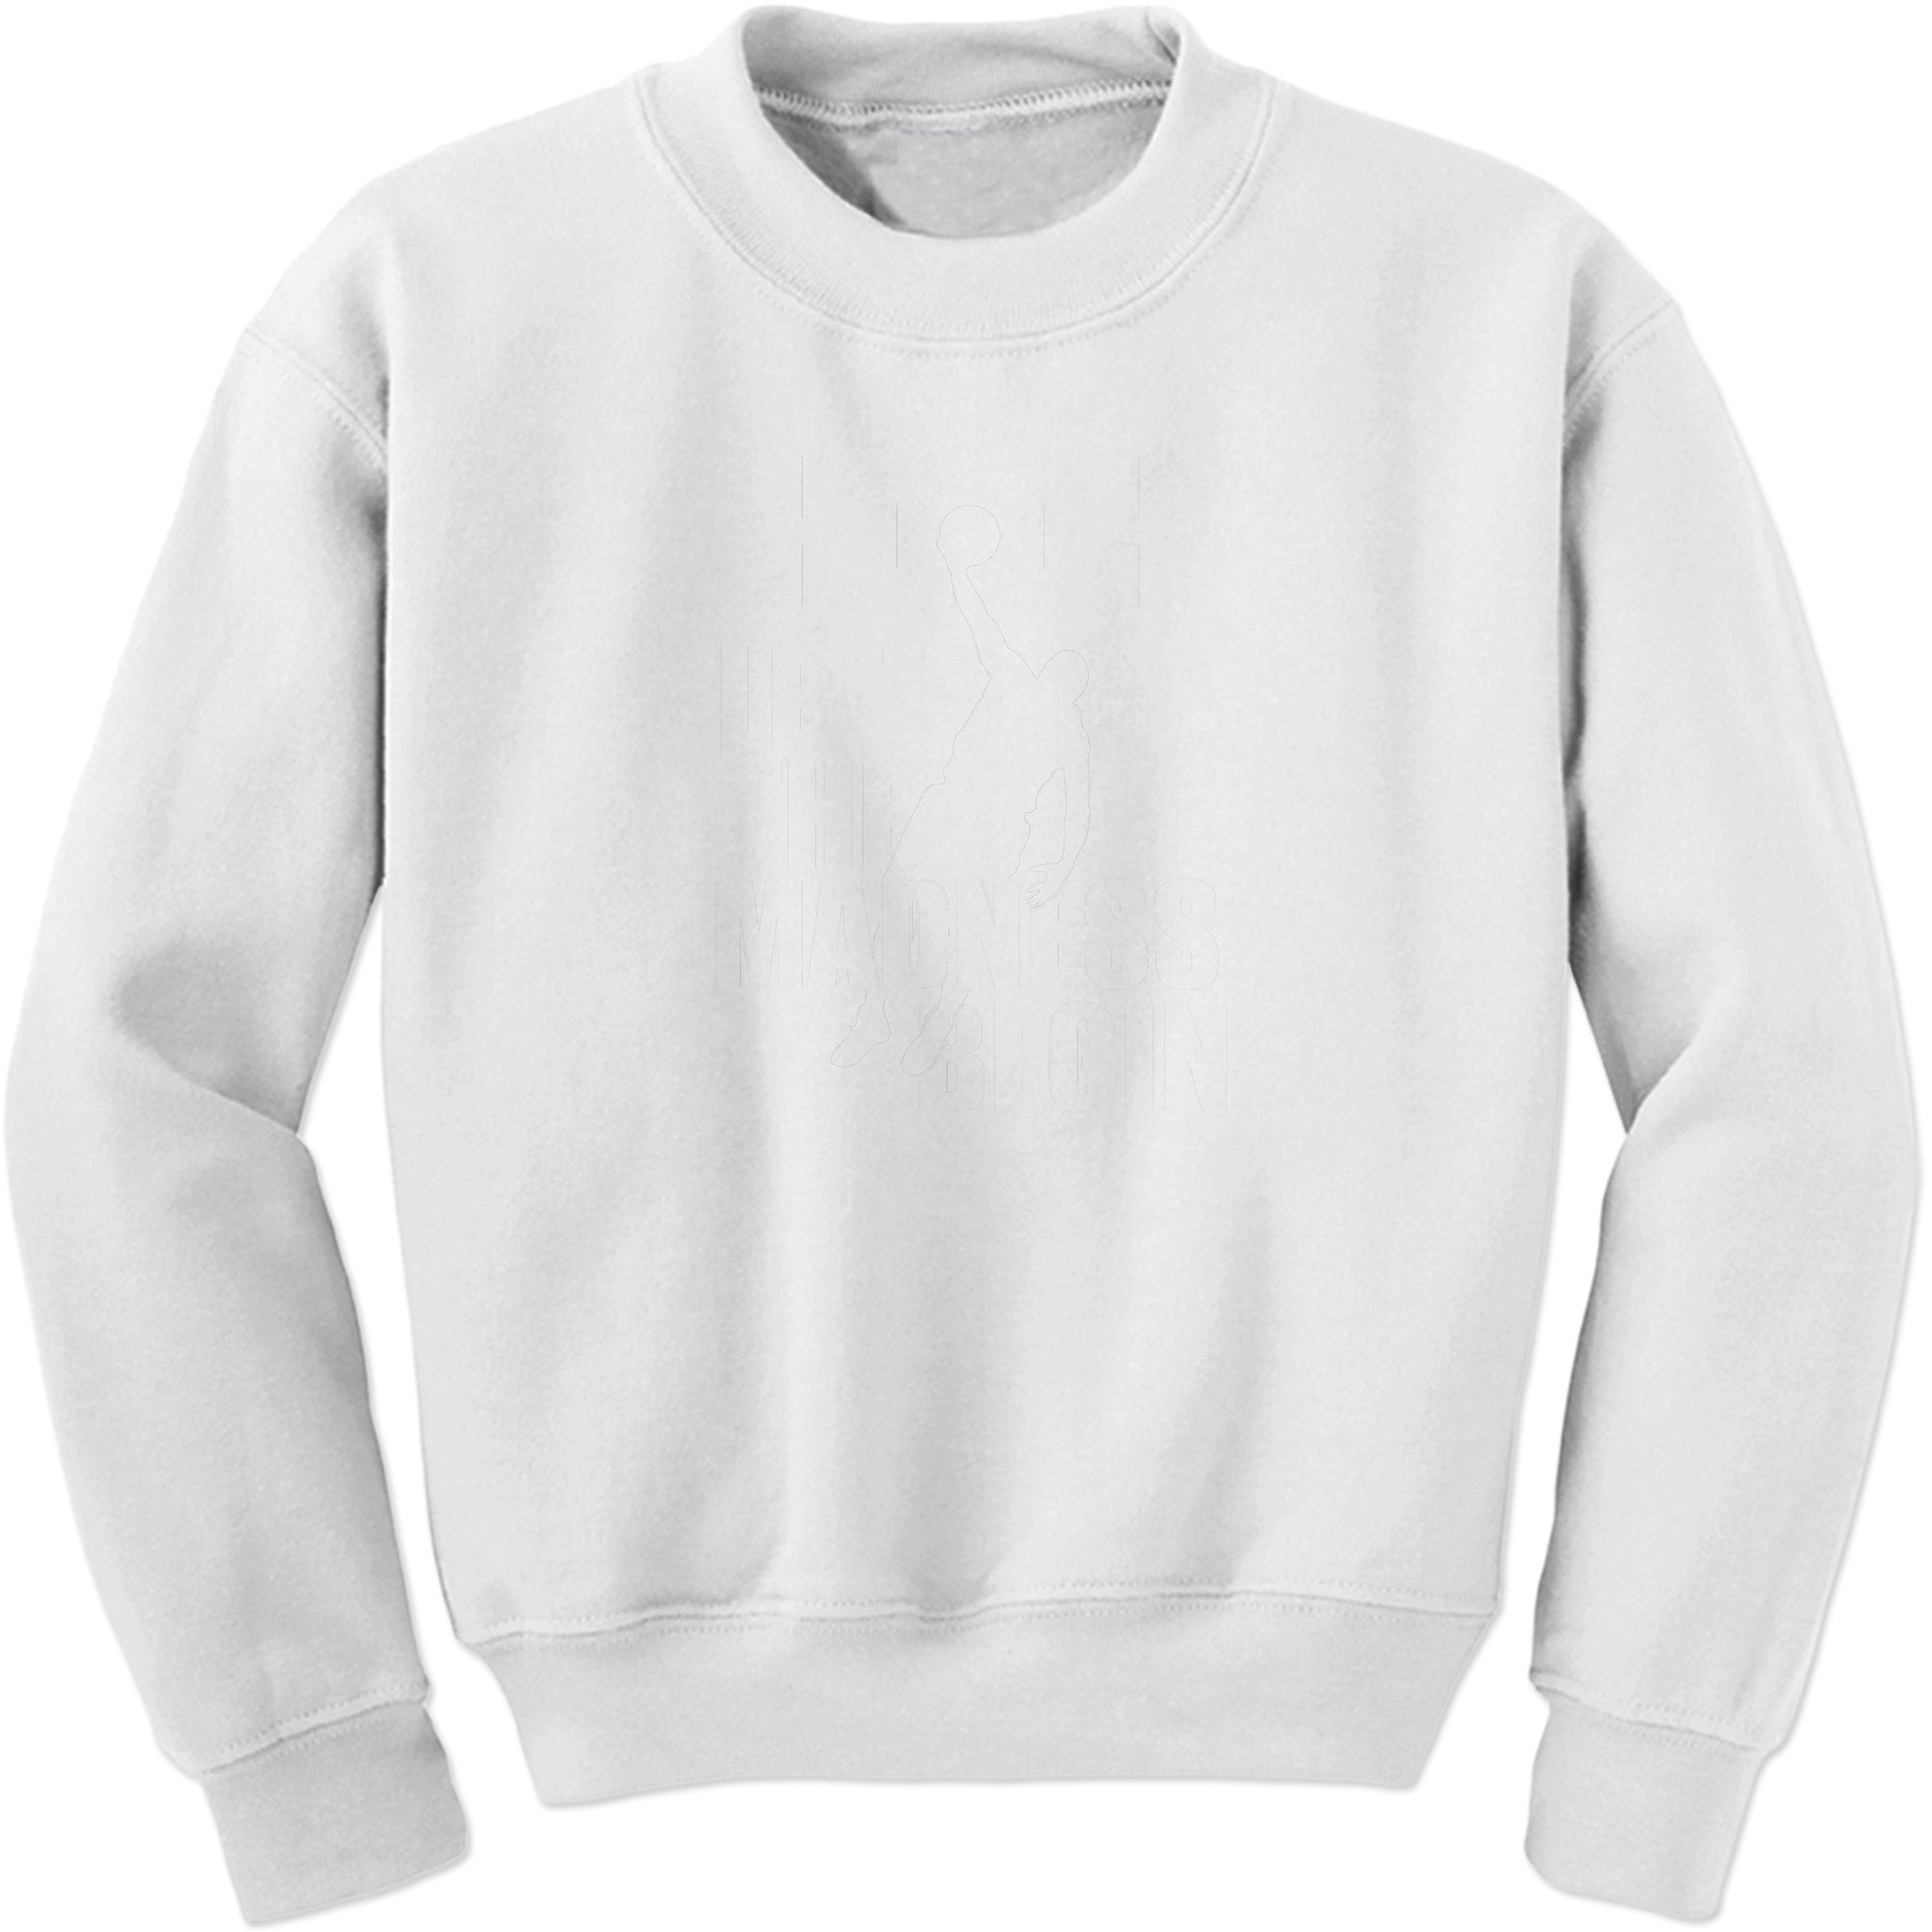 March to College Basketball Madness Sweatshirt